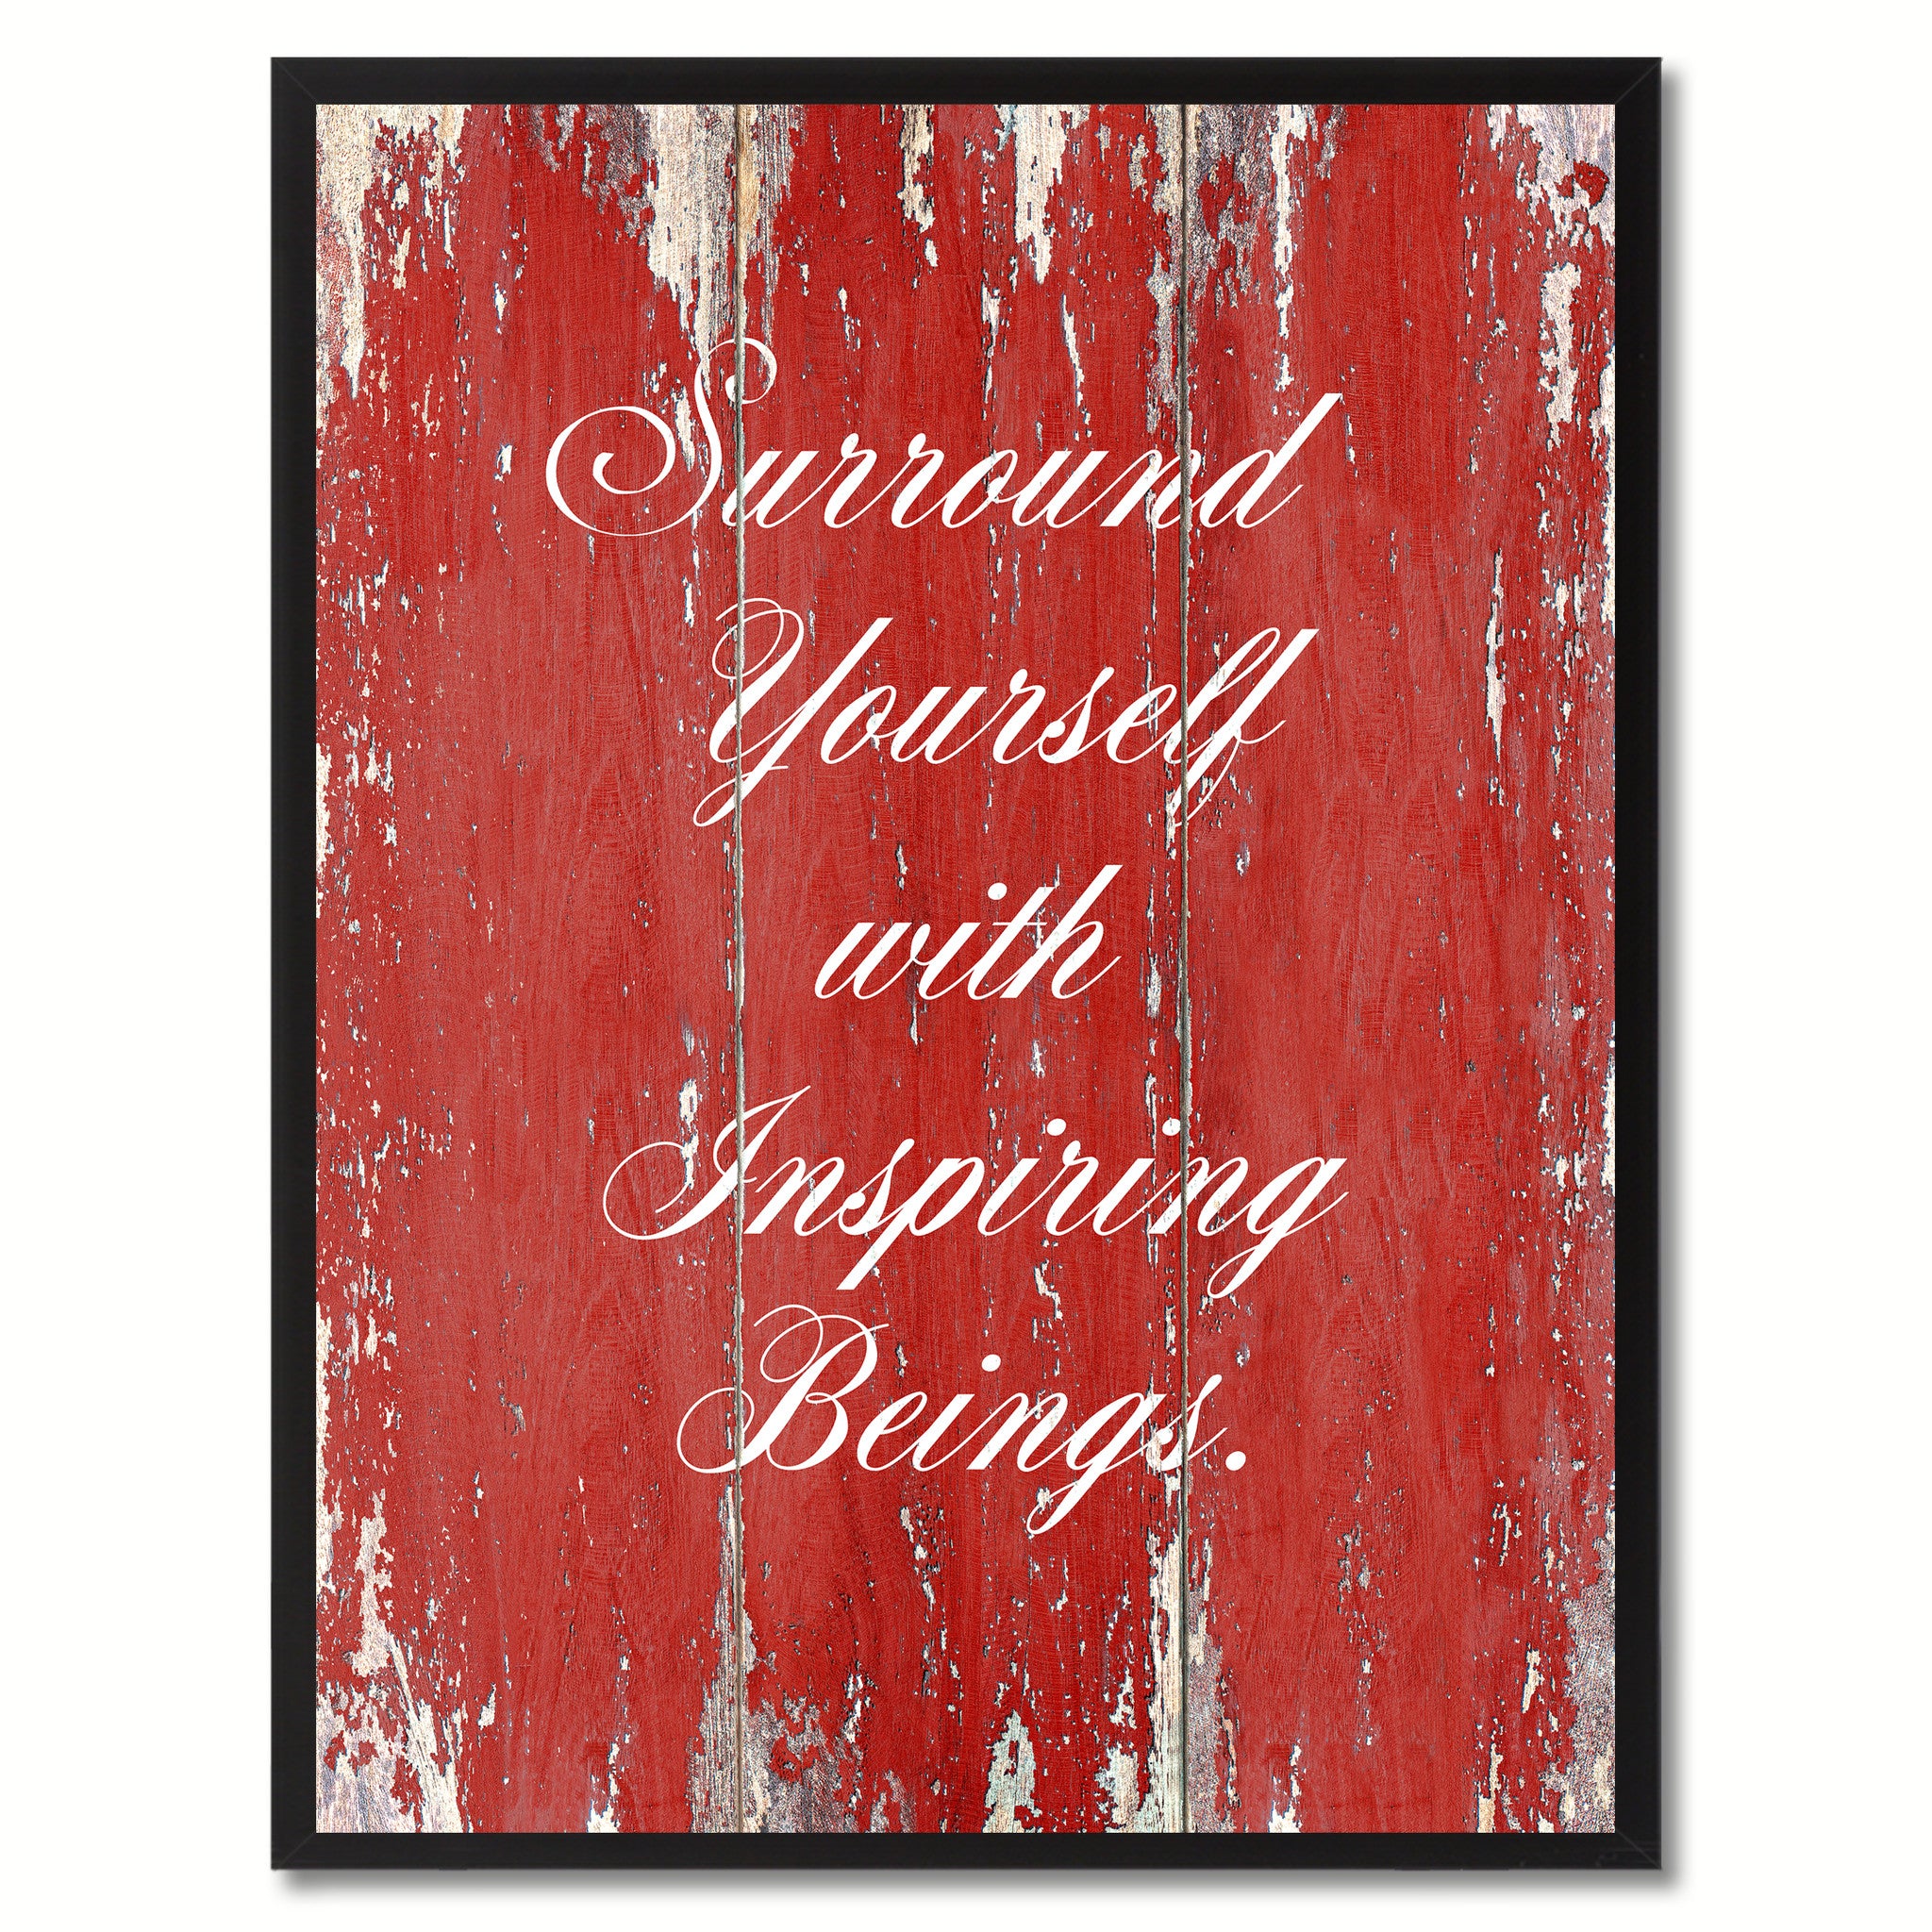 Surround Yourself With Inspiring Beings Saying Canvas Print, Black Picture Frame Home Decor Wall Art Gifts